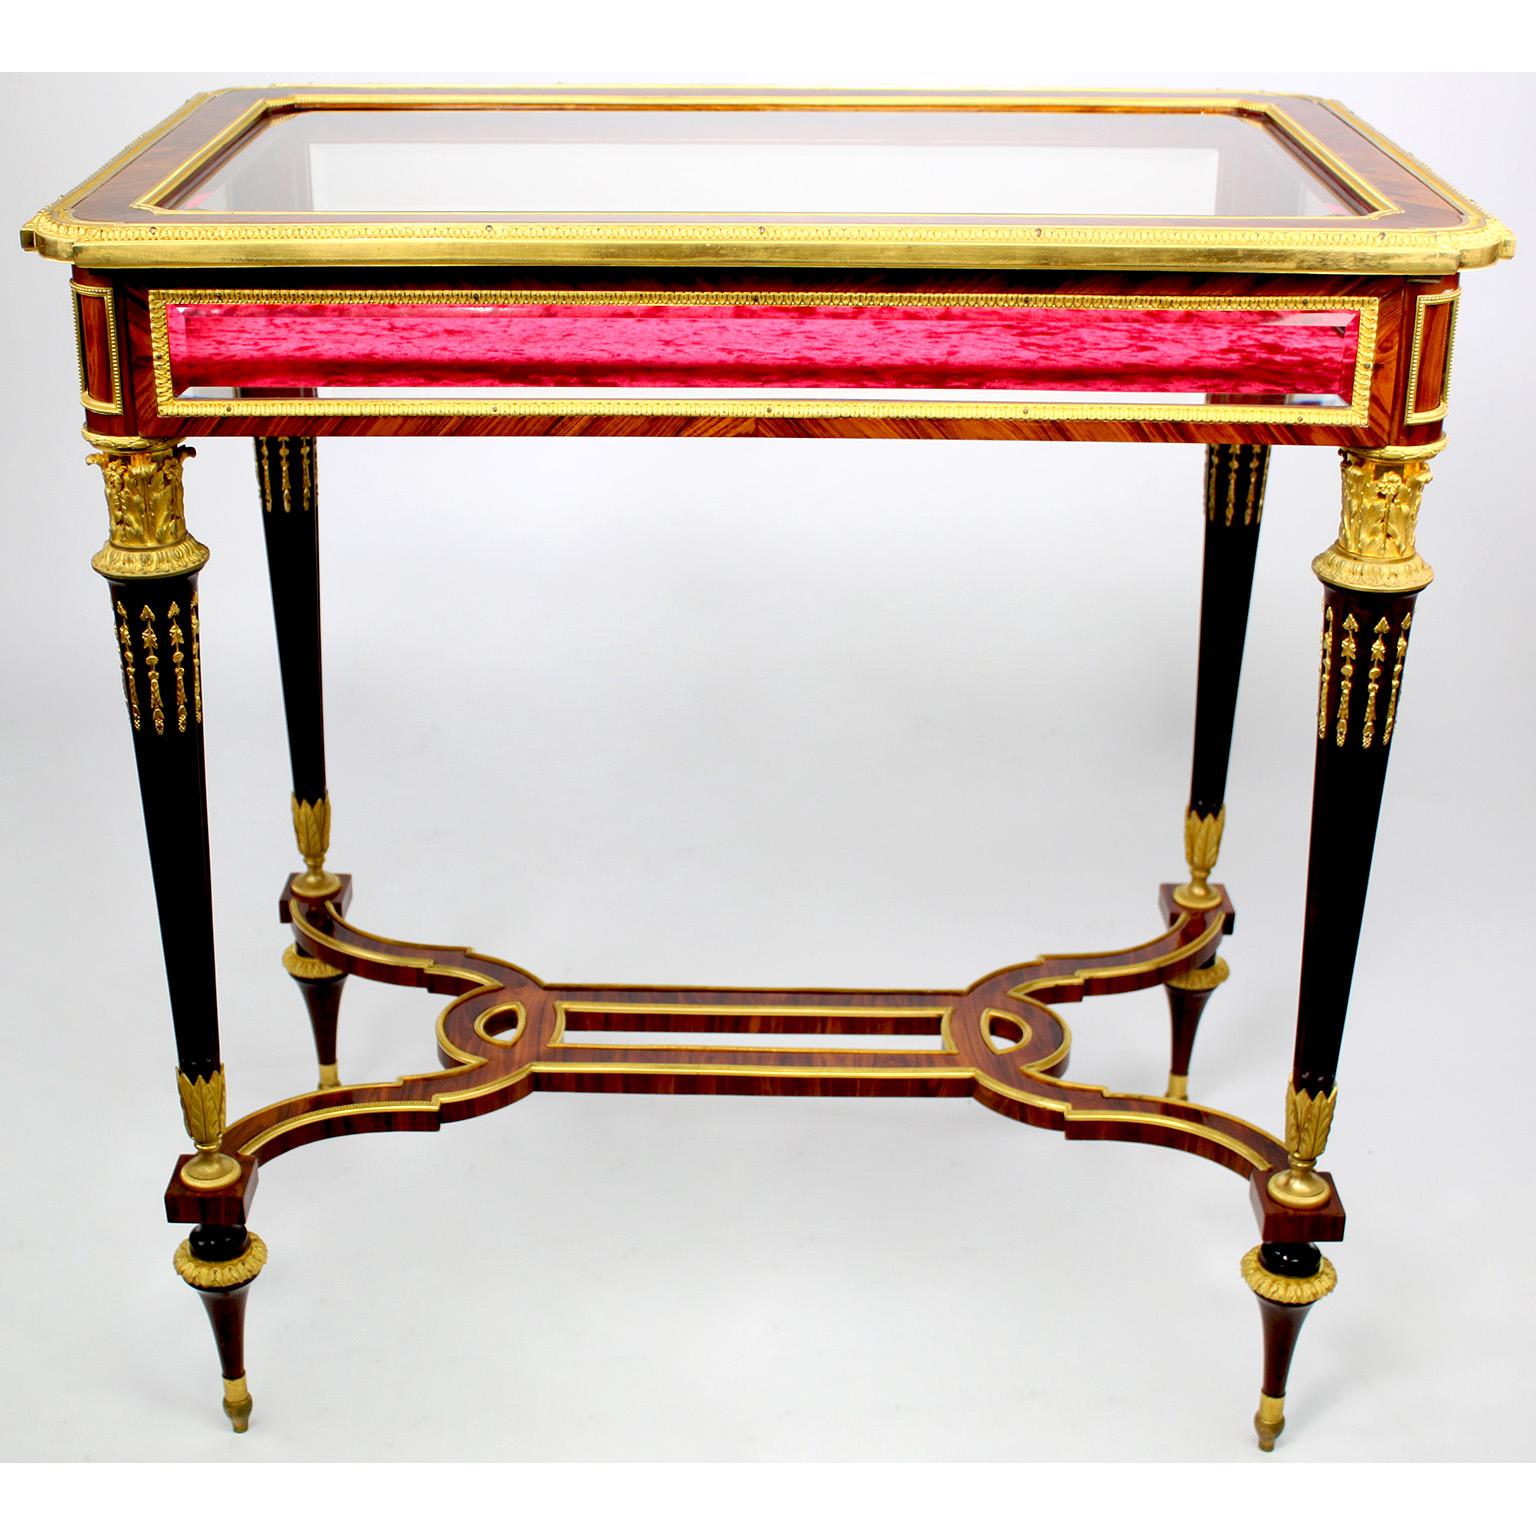 A 19th Century Louis XVI Style Ormolu Mounted Vitrine Table Attr. Henry Dasson  In Good Condition For Sale In Los Angeles, CA